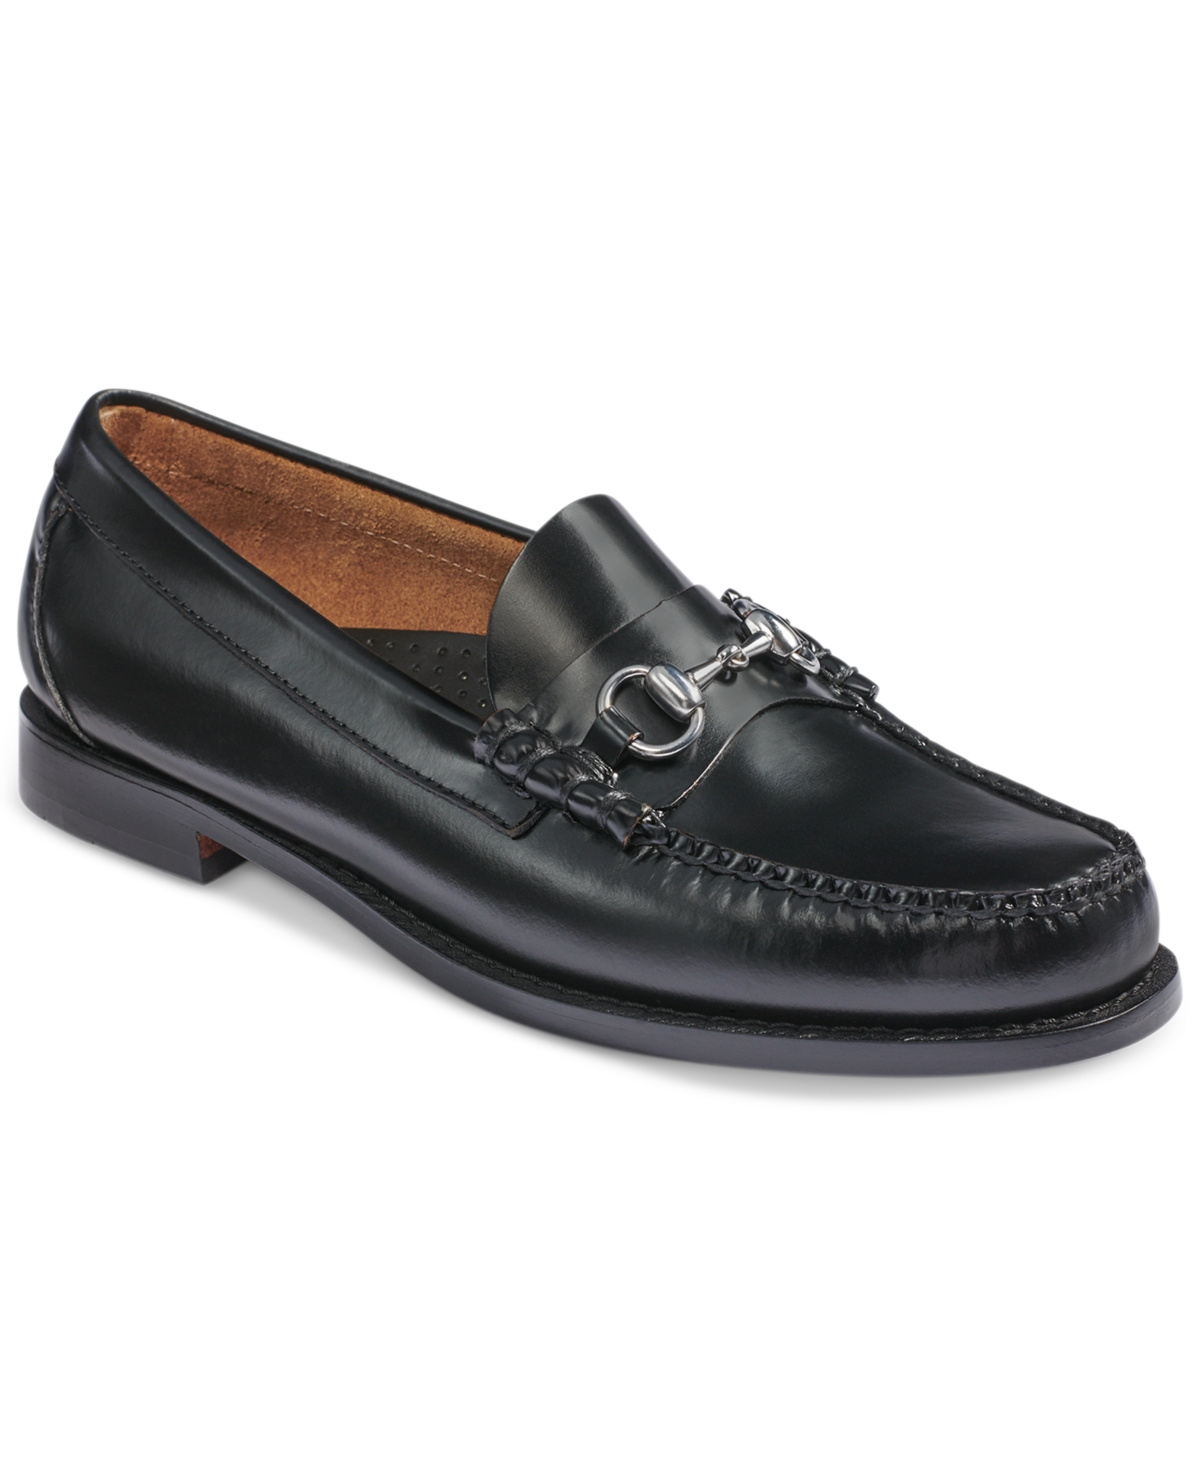 G.h.bass Men's Lincoln Leather Penny Loafers - Black